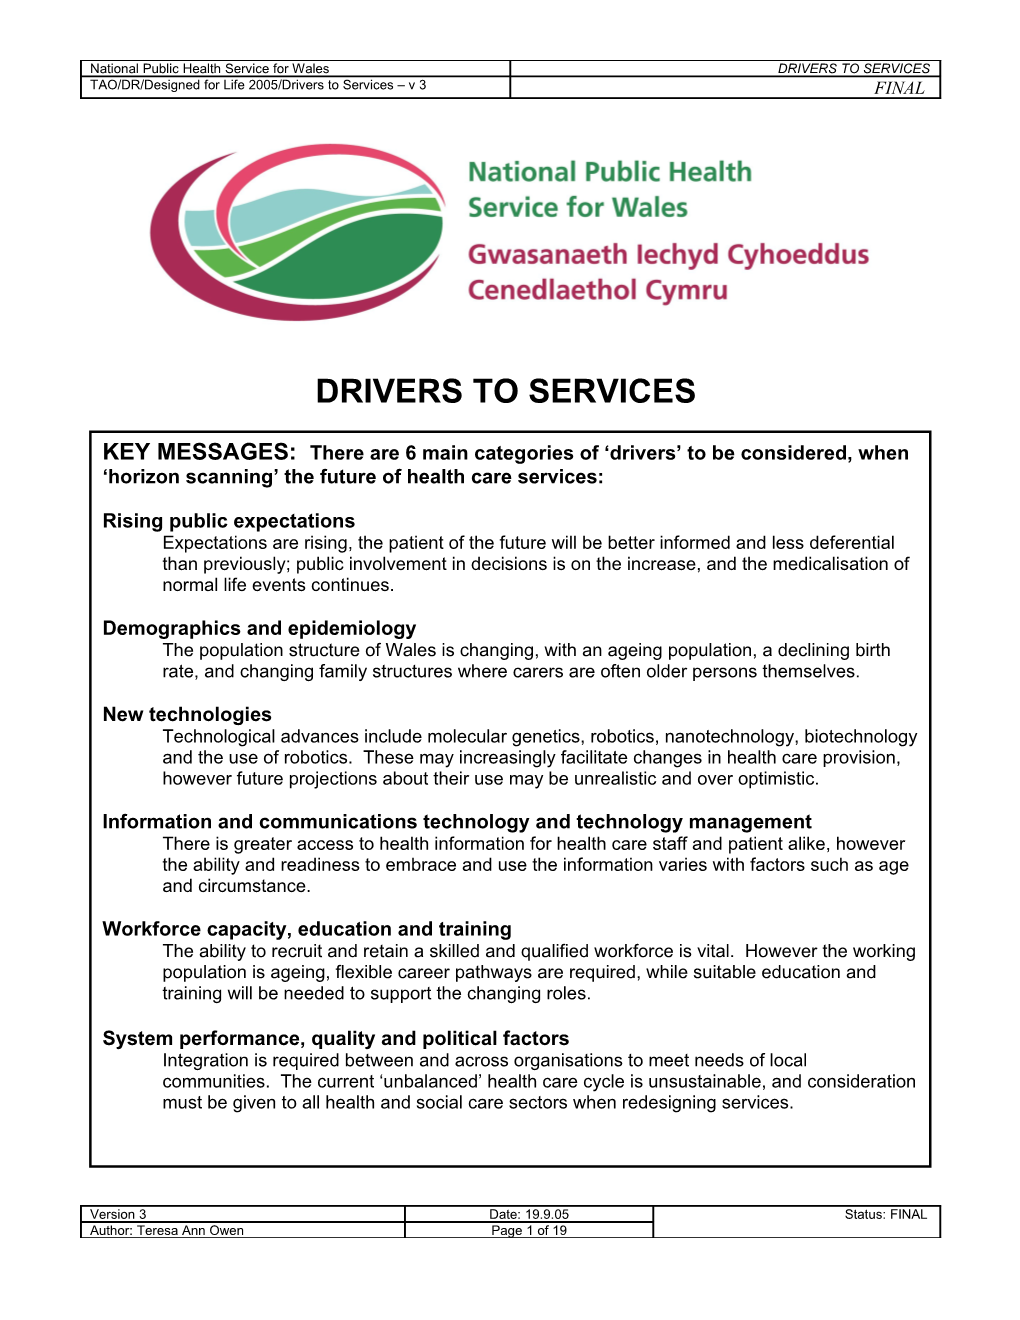 Drivers to Services